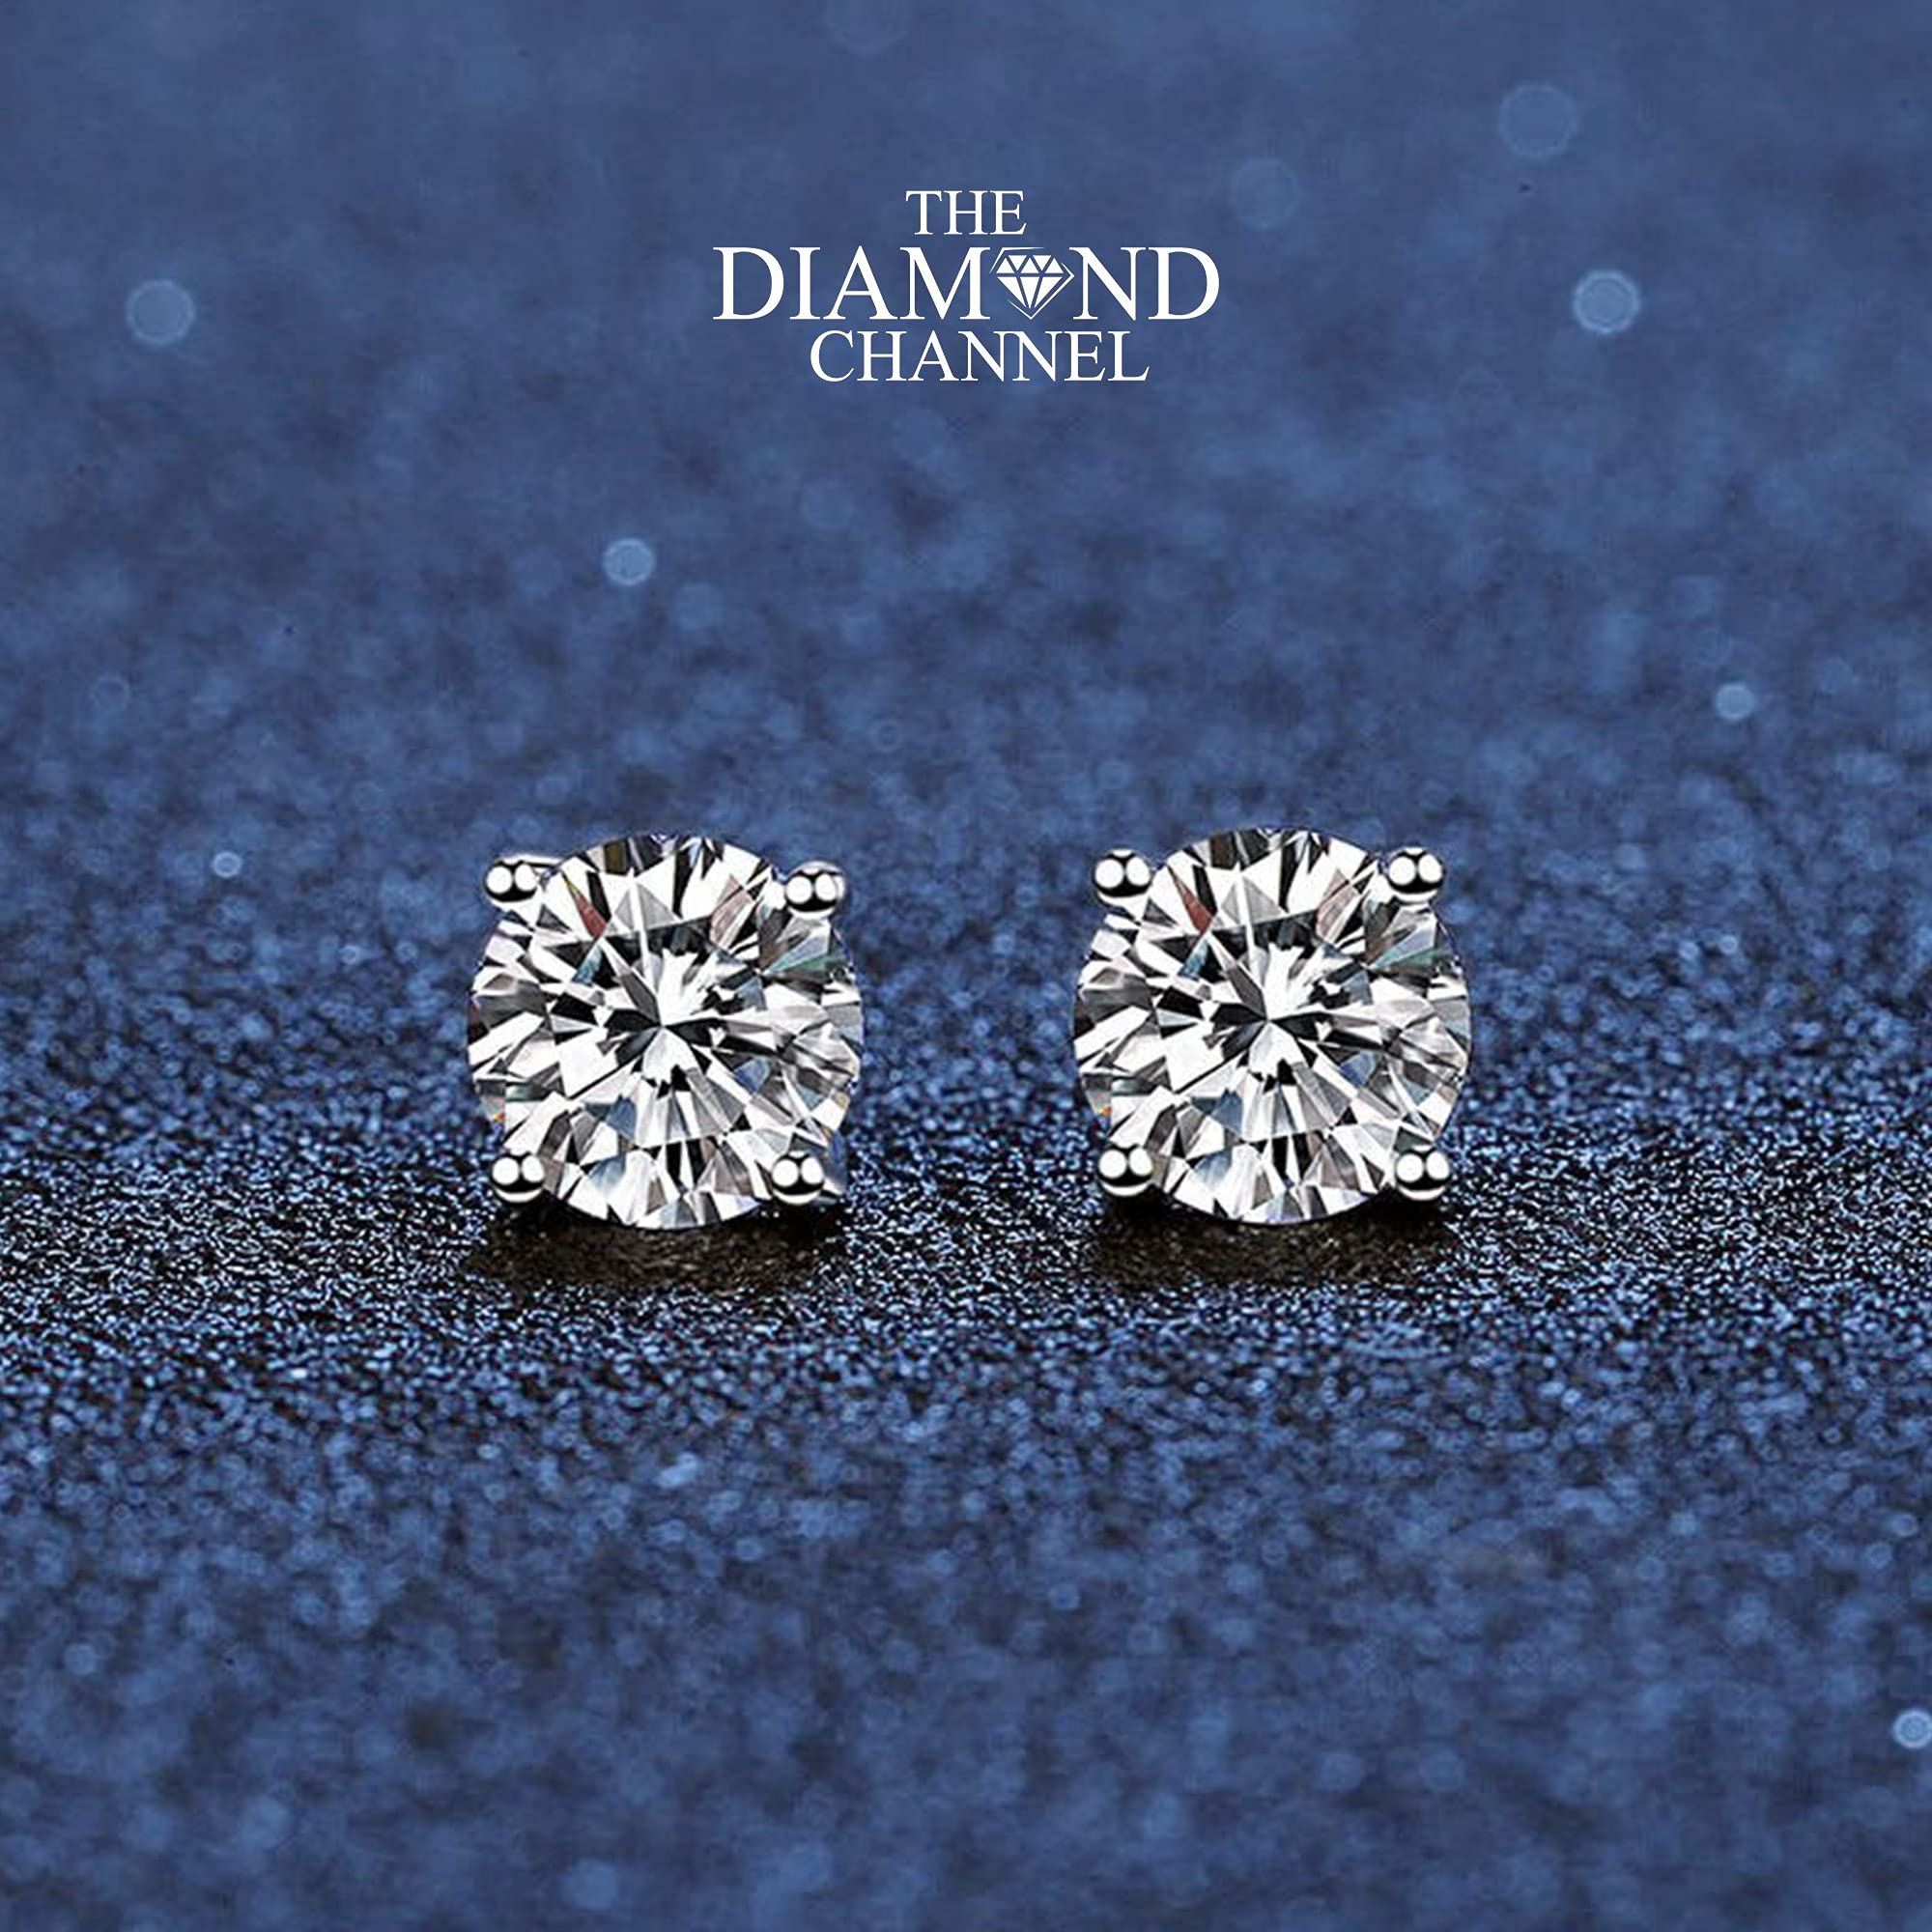 Certified Natural Diamond Stud Earrings for Women 14 Karat Gold Round Brilliant Shaped Earrings 4 Prong Setting with Screw Back and Posts Studs Fine Jewelry for Women